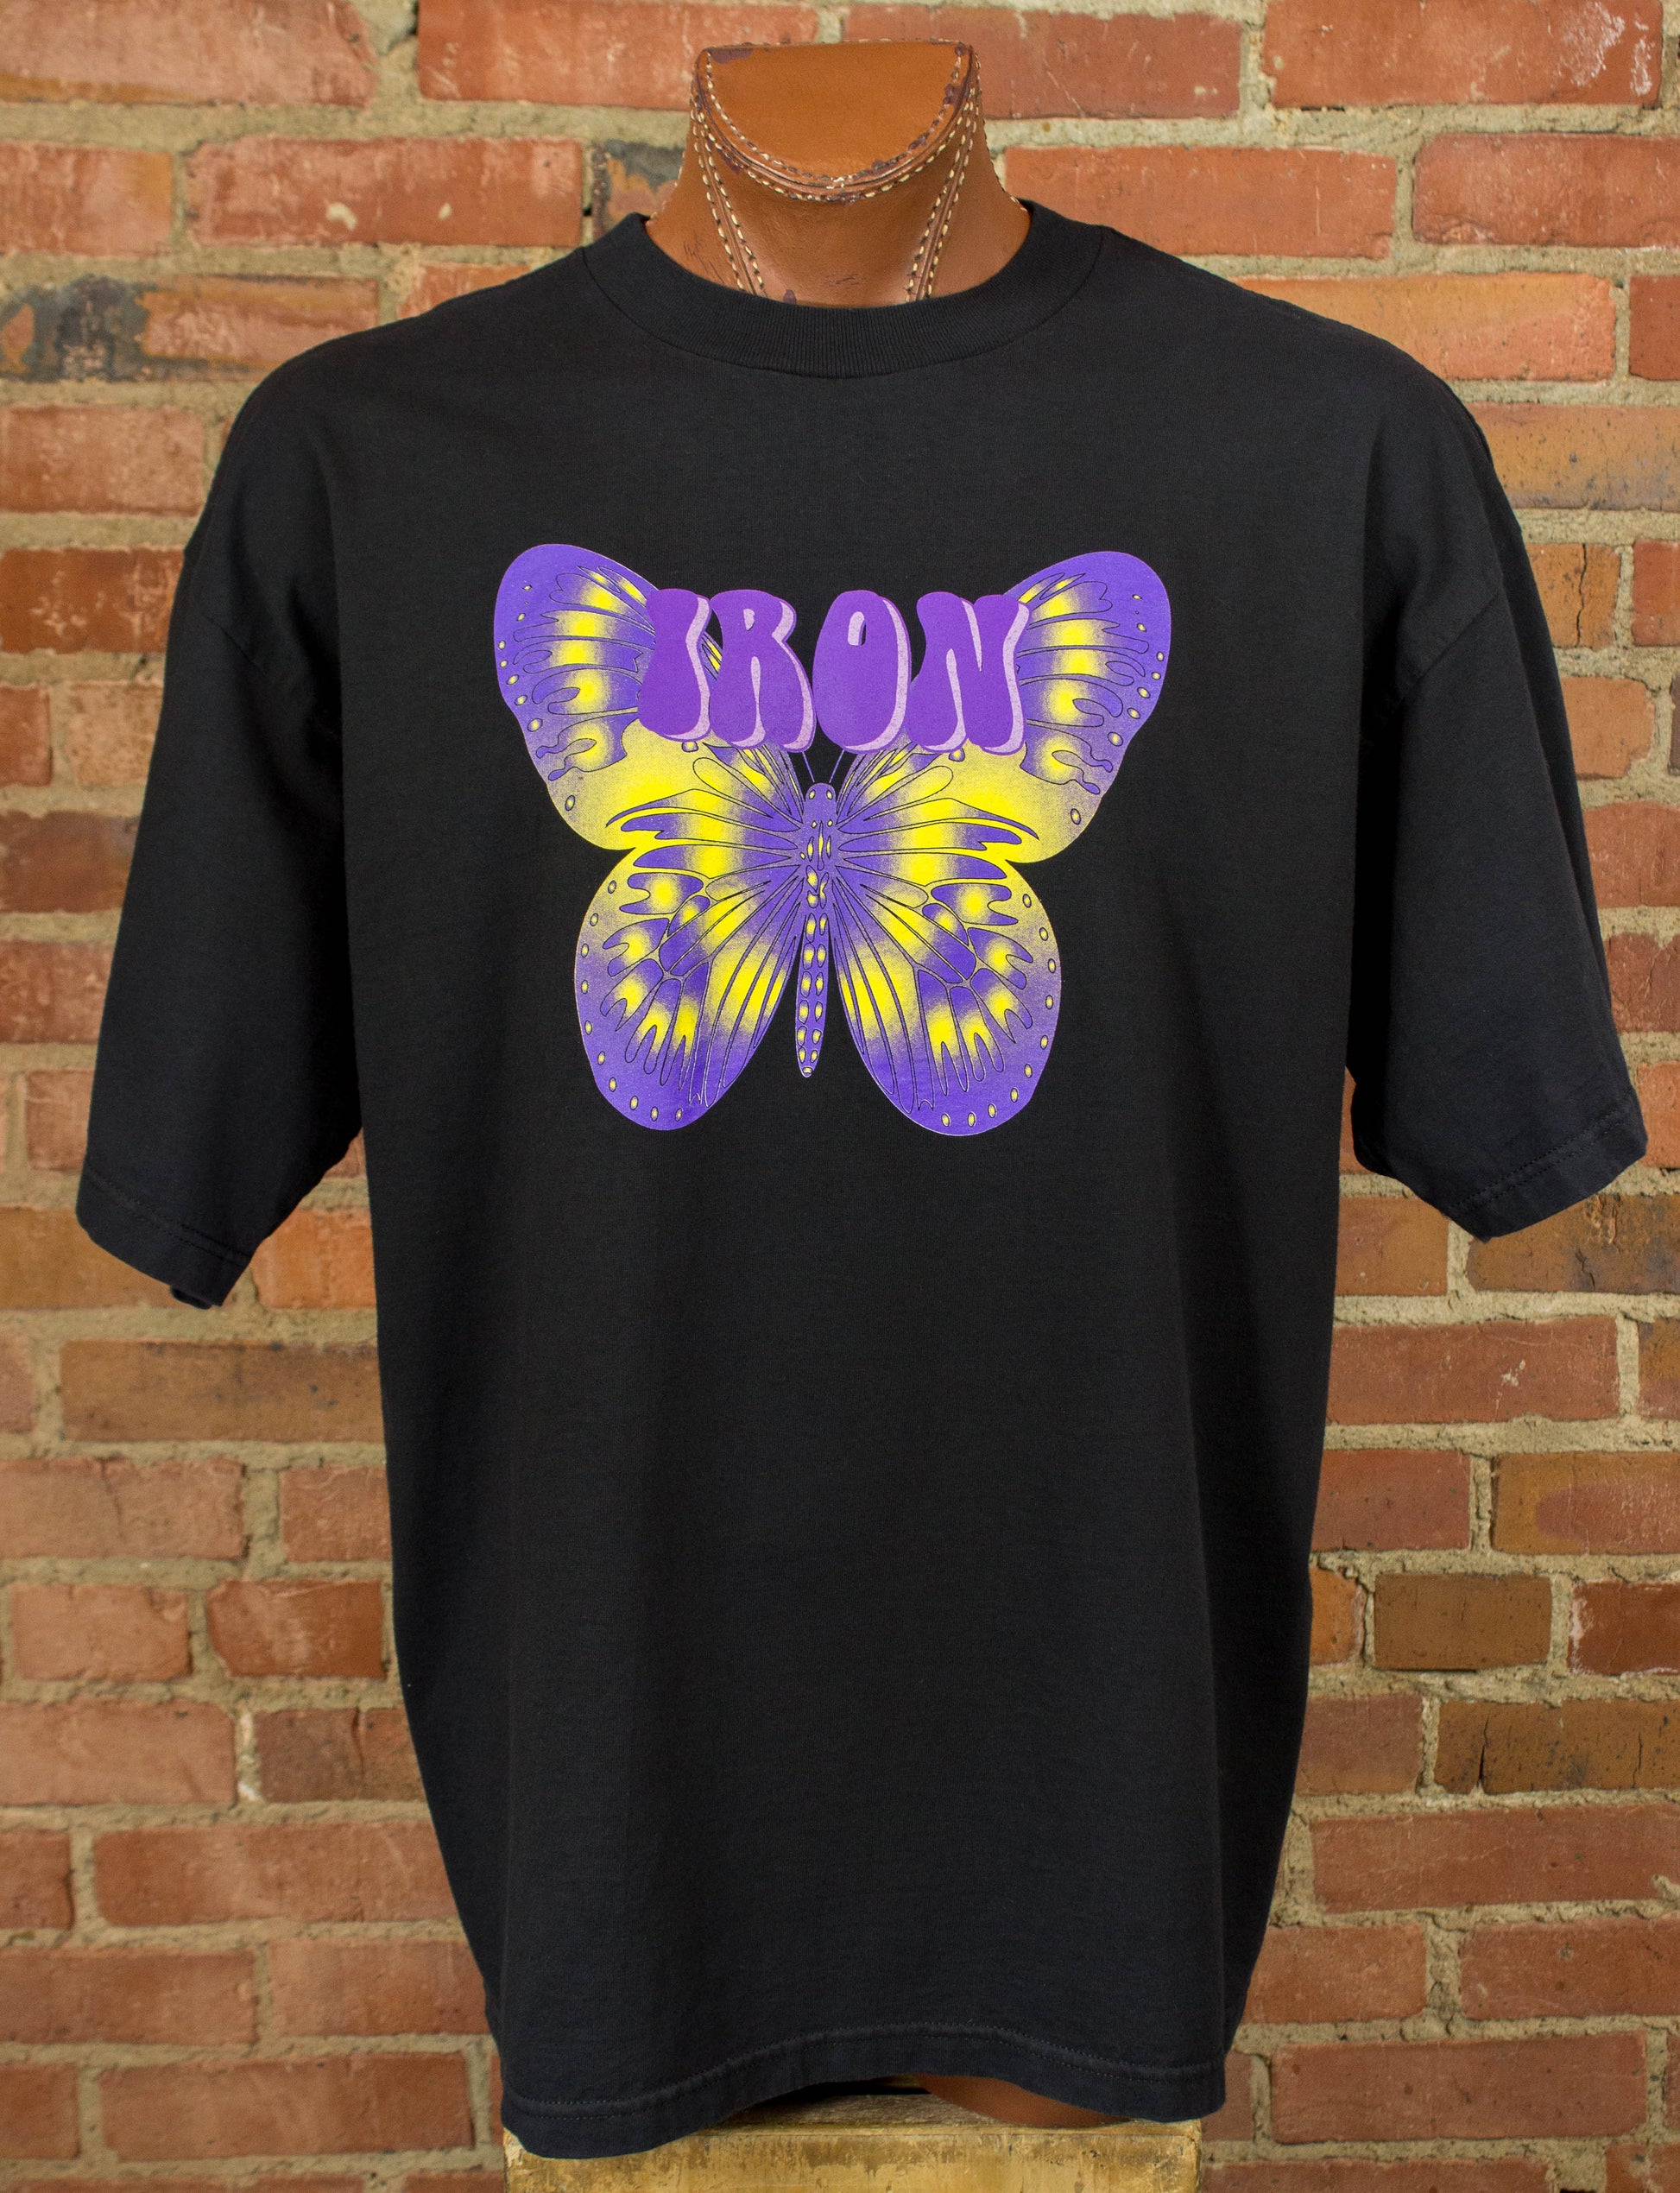 Vintage Iron Butterfly Concert T Shirt 90s Purple and Yellow Butterfly Logo XXL